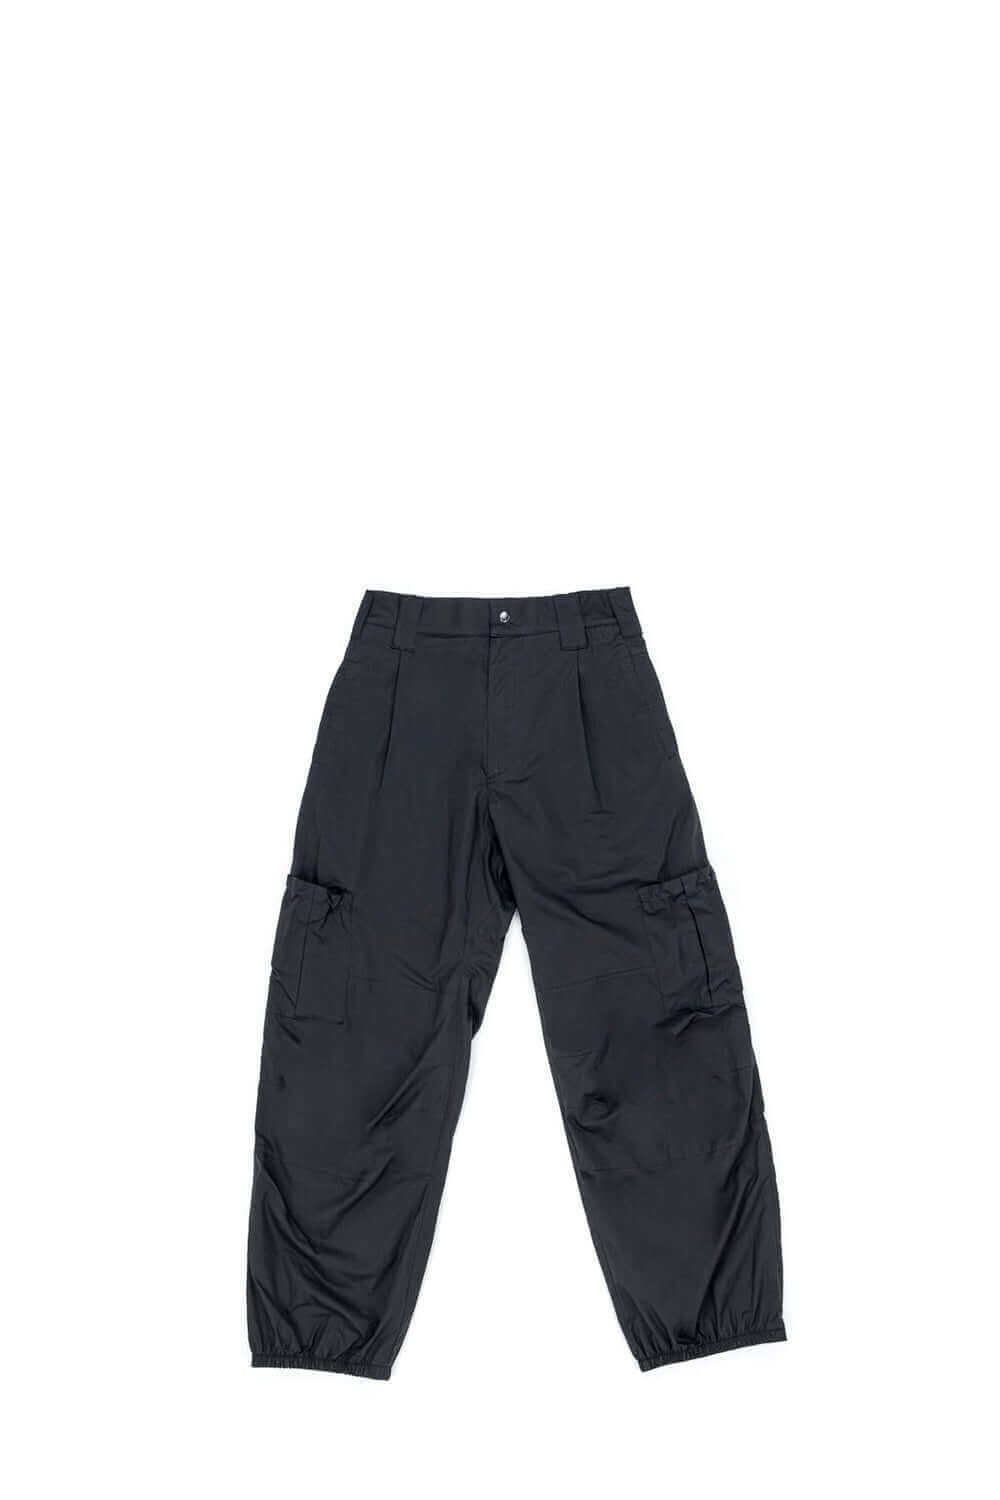 CARGO OVER W. Cargo pants with front button and zip closure. Frontal pockets. Side leg pockets and adjustable bottom closure. Composition: 100% Cotton HTC LOS ANGELES